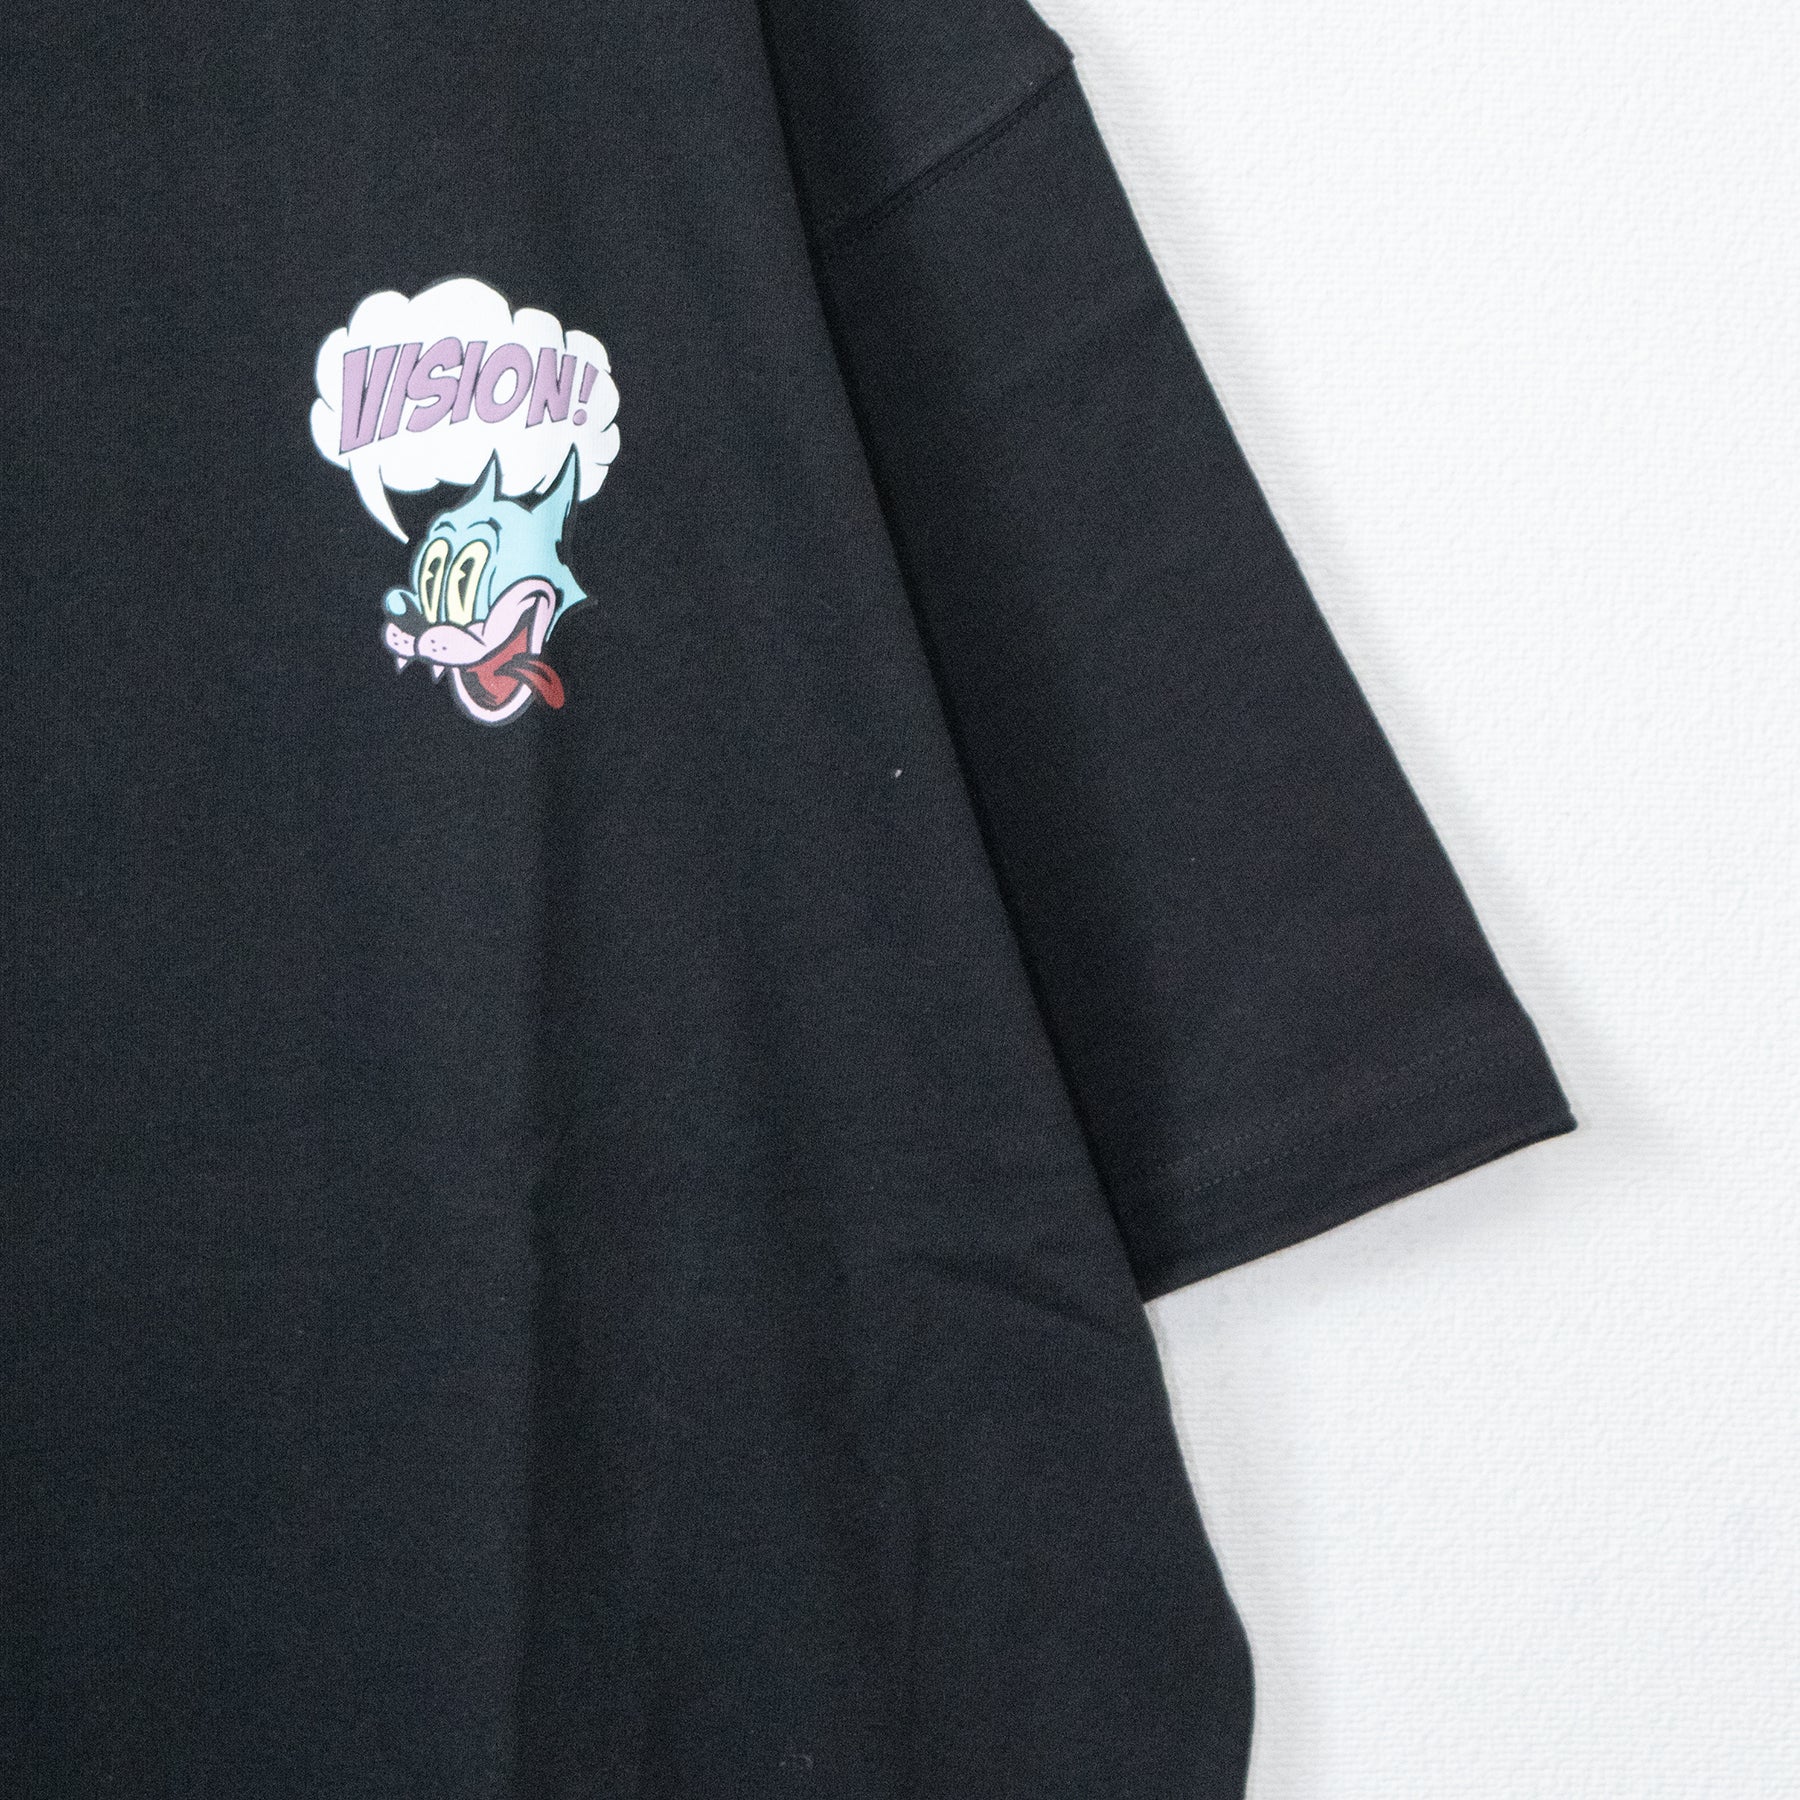 VISION STREET WEAR Comic S/S T-shirt (2 color) - YOUAREMYPOISON